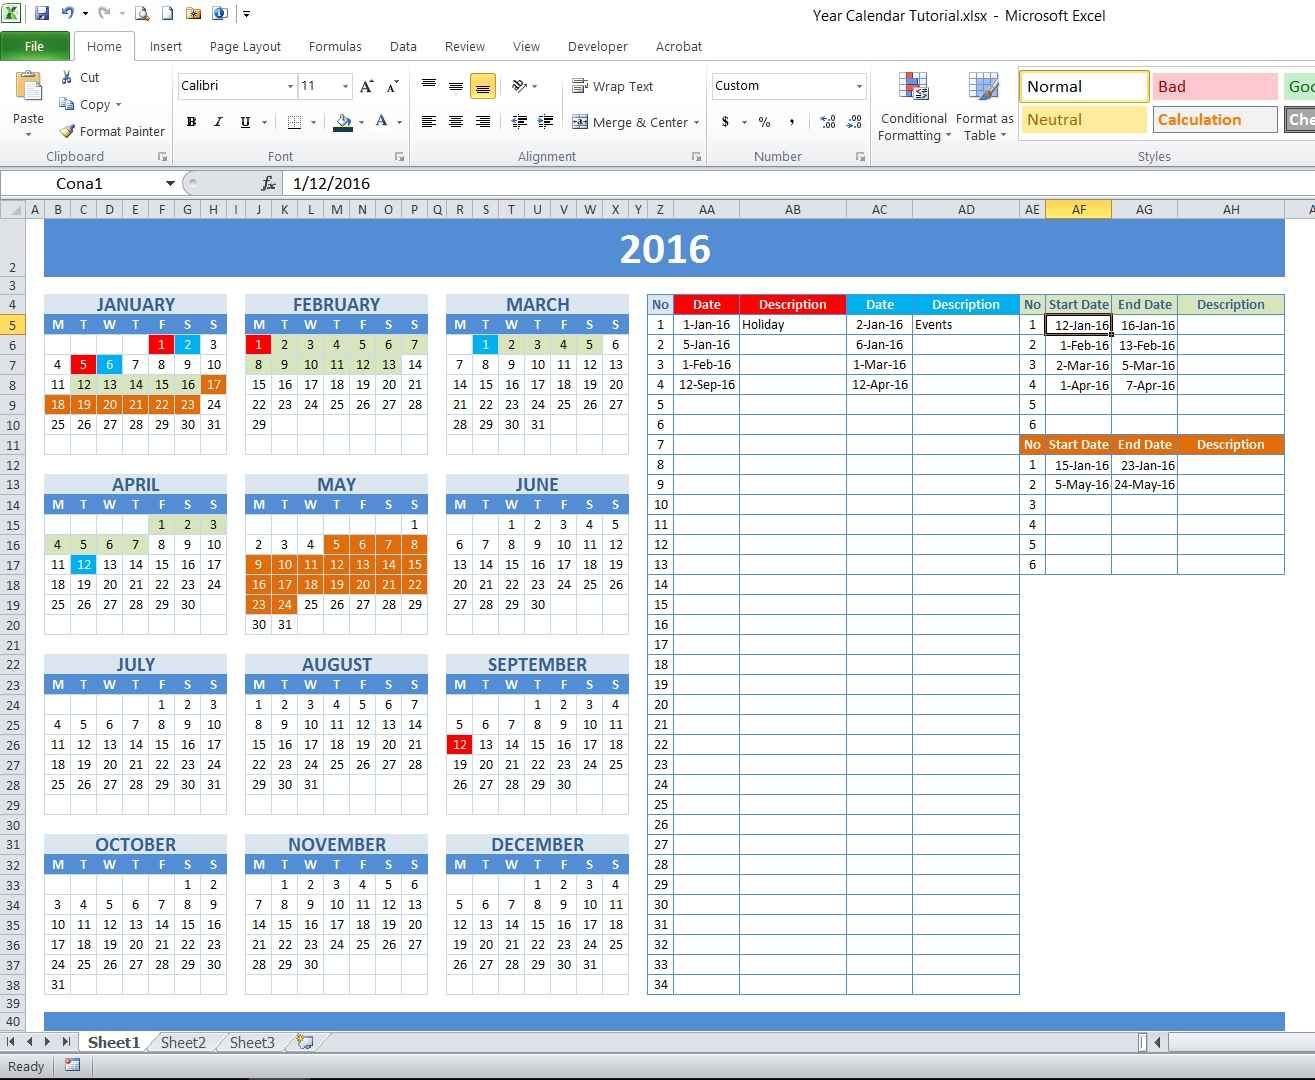 propsed calendar for work outs on excel 49